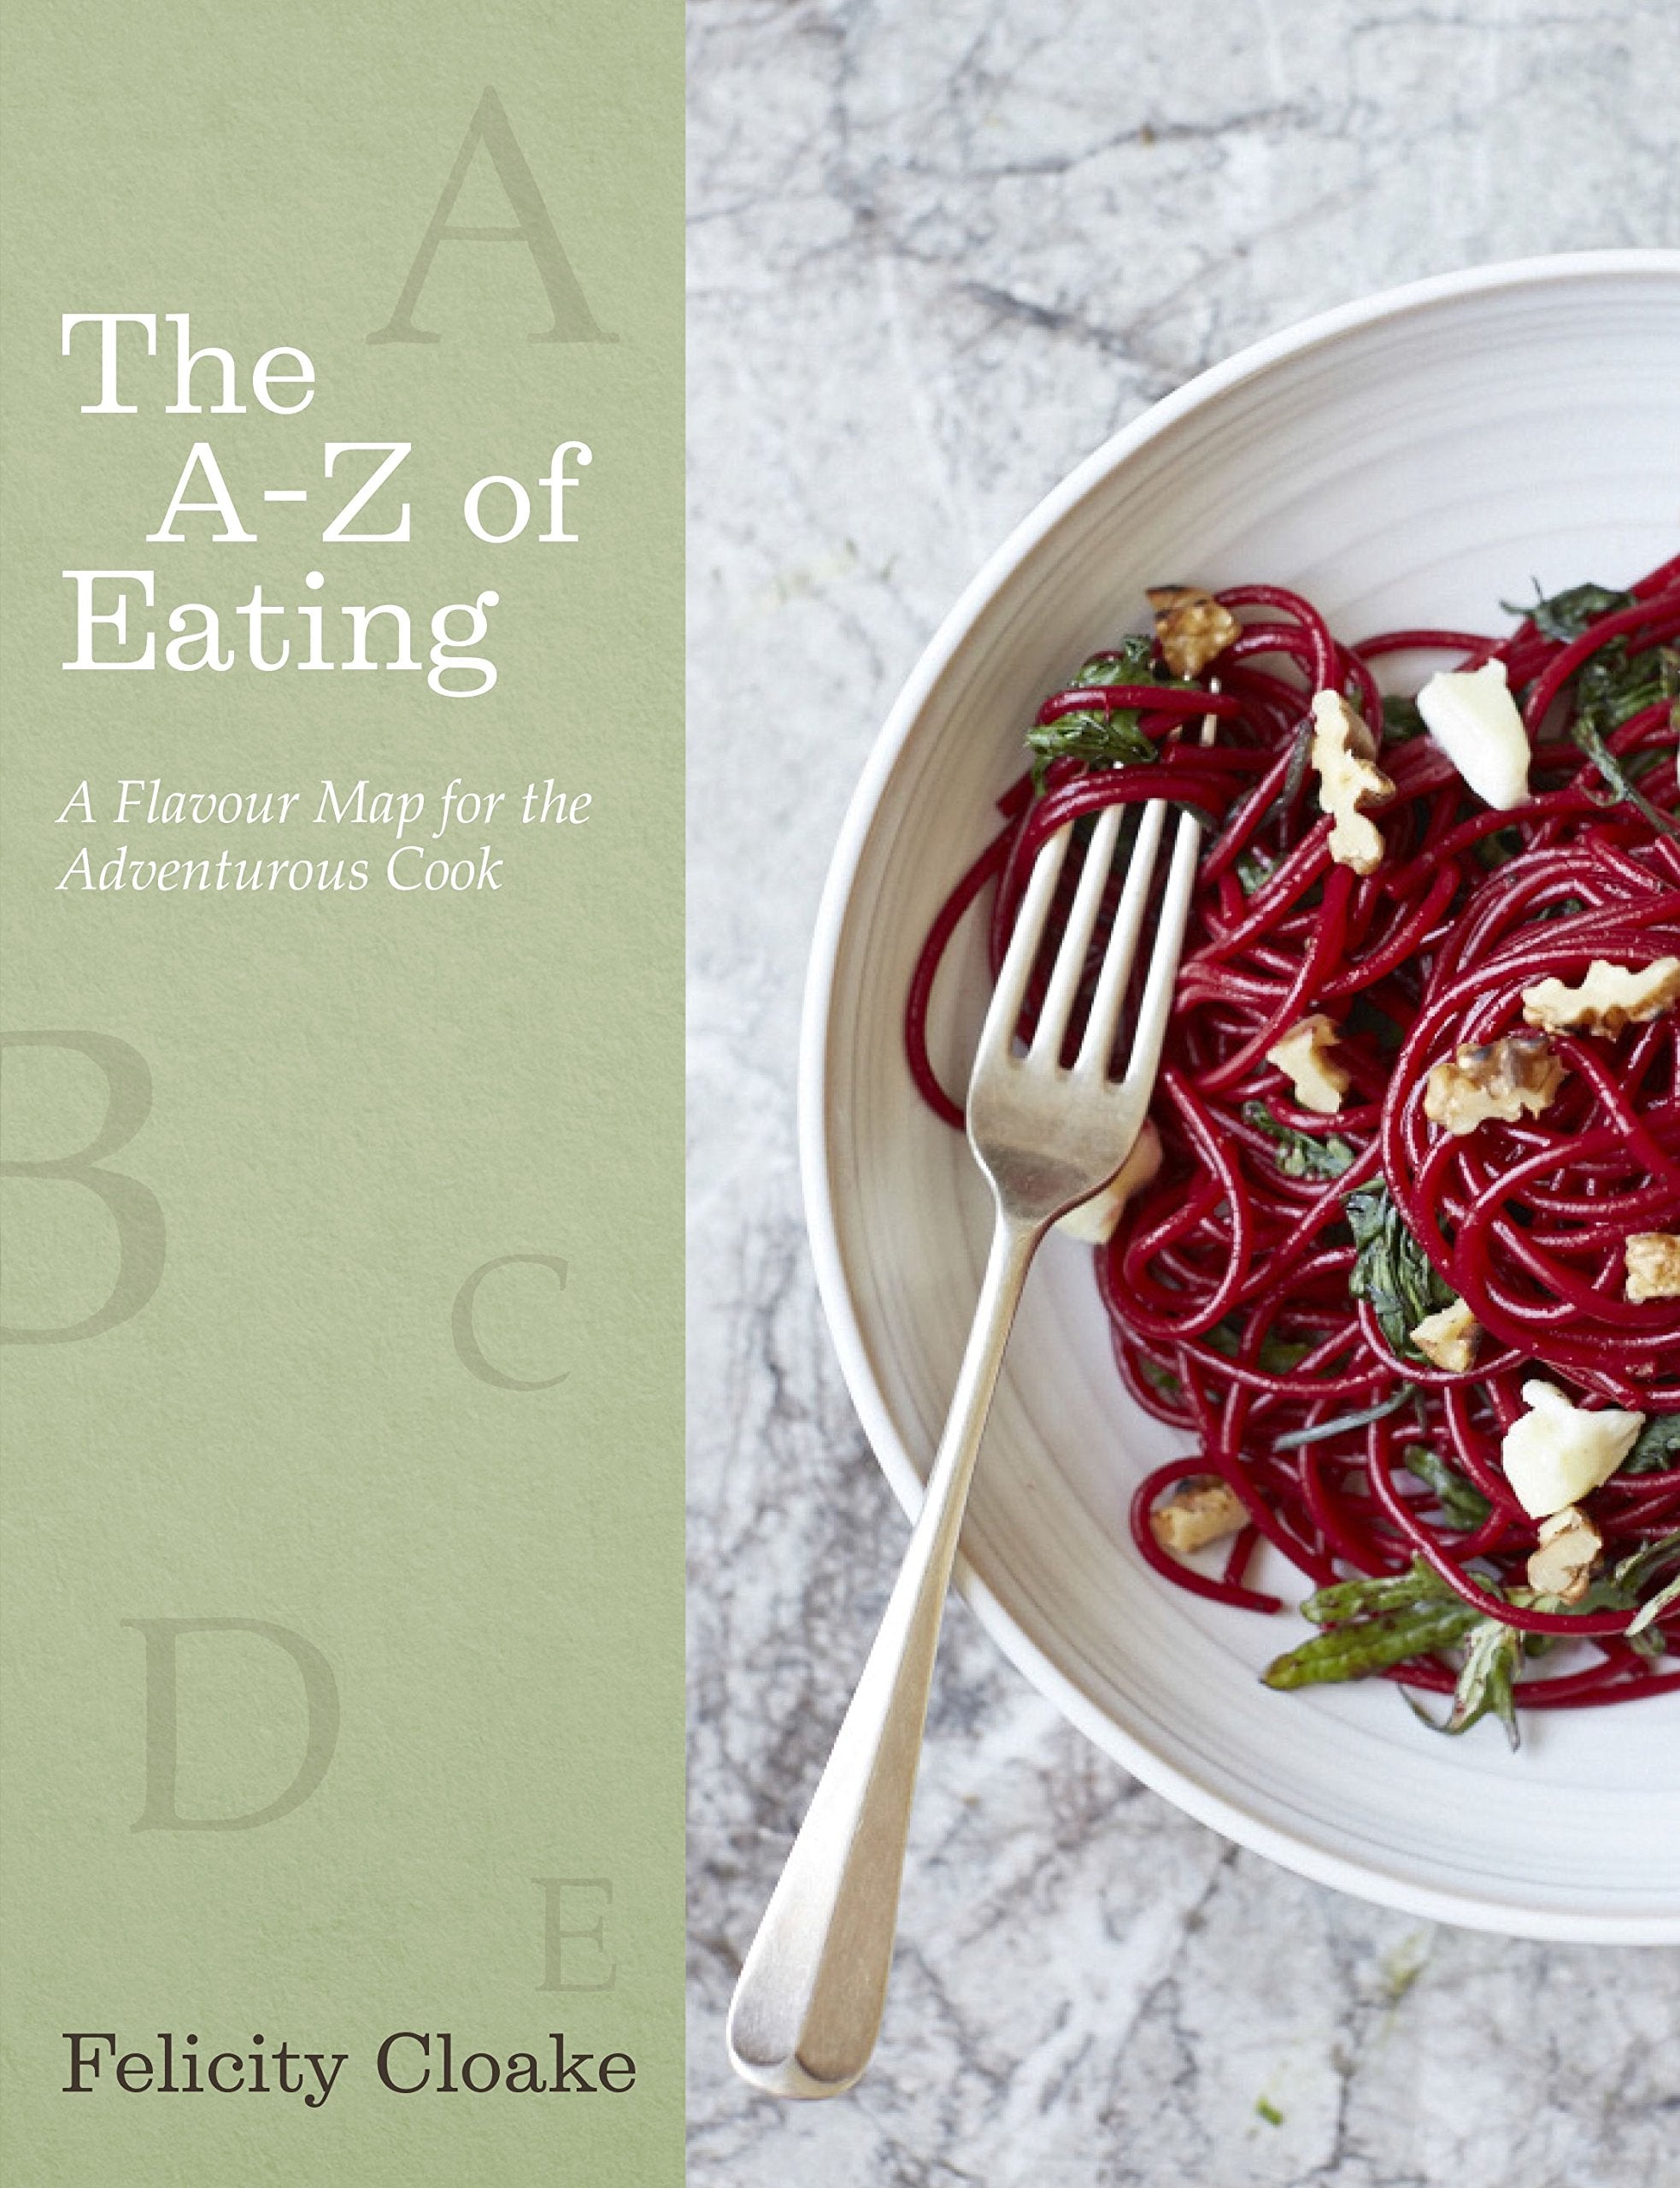 The A-Z of Eating: A Flavour Map for the Adventurous Cook (Felicity Cloake)